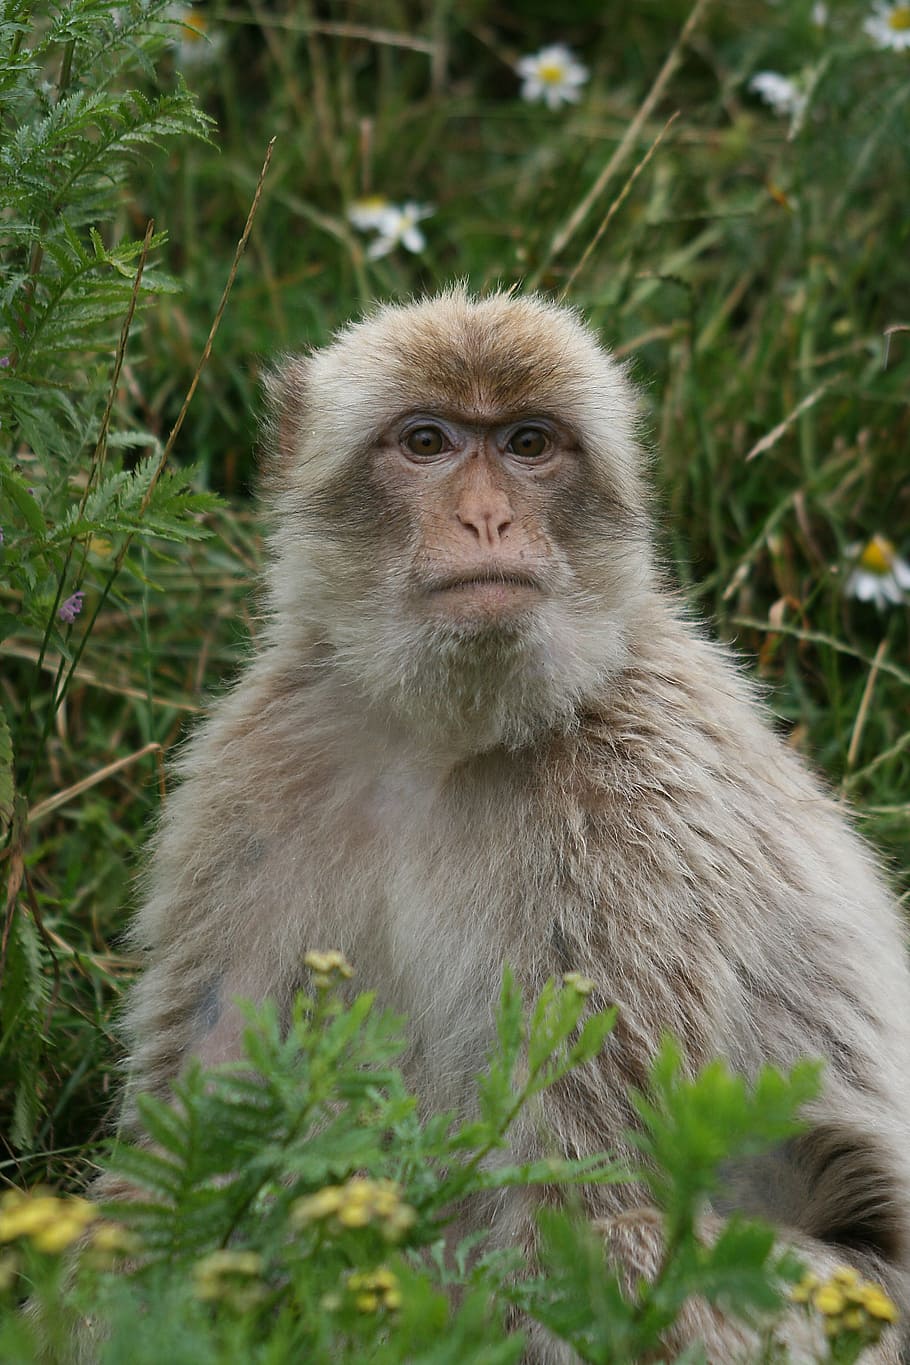 monkey, face to face, animal, mammal, wildlife, primate, nature, macaque, animals In The Wild, outdoors